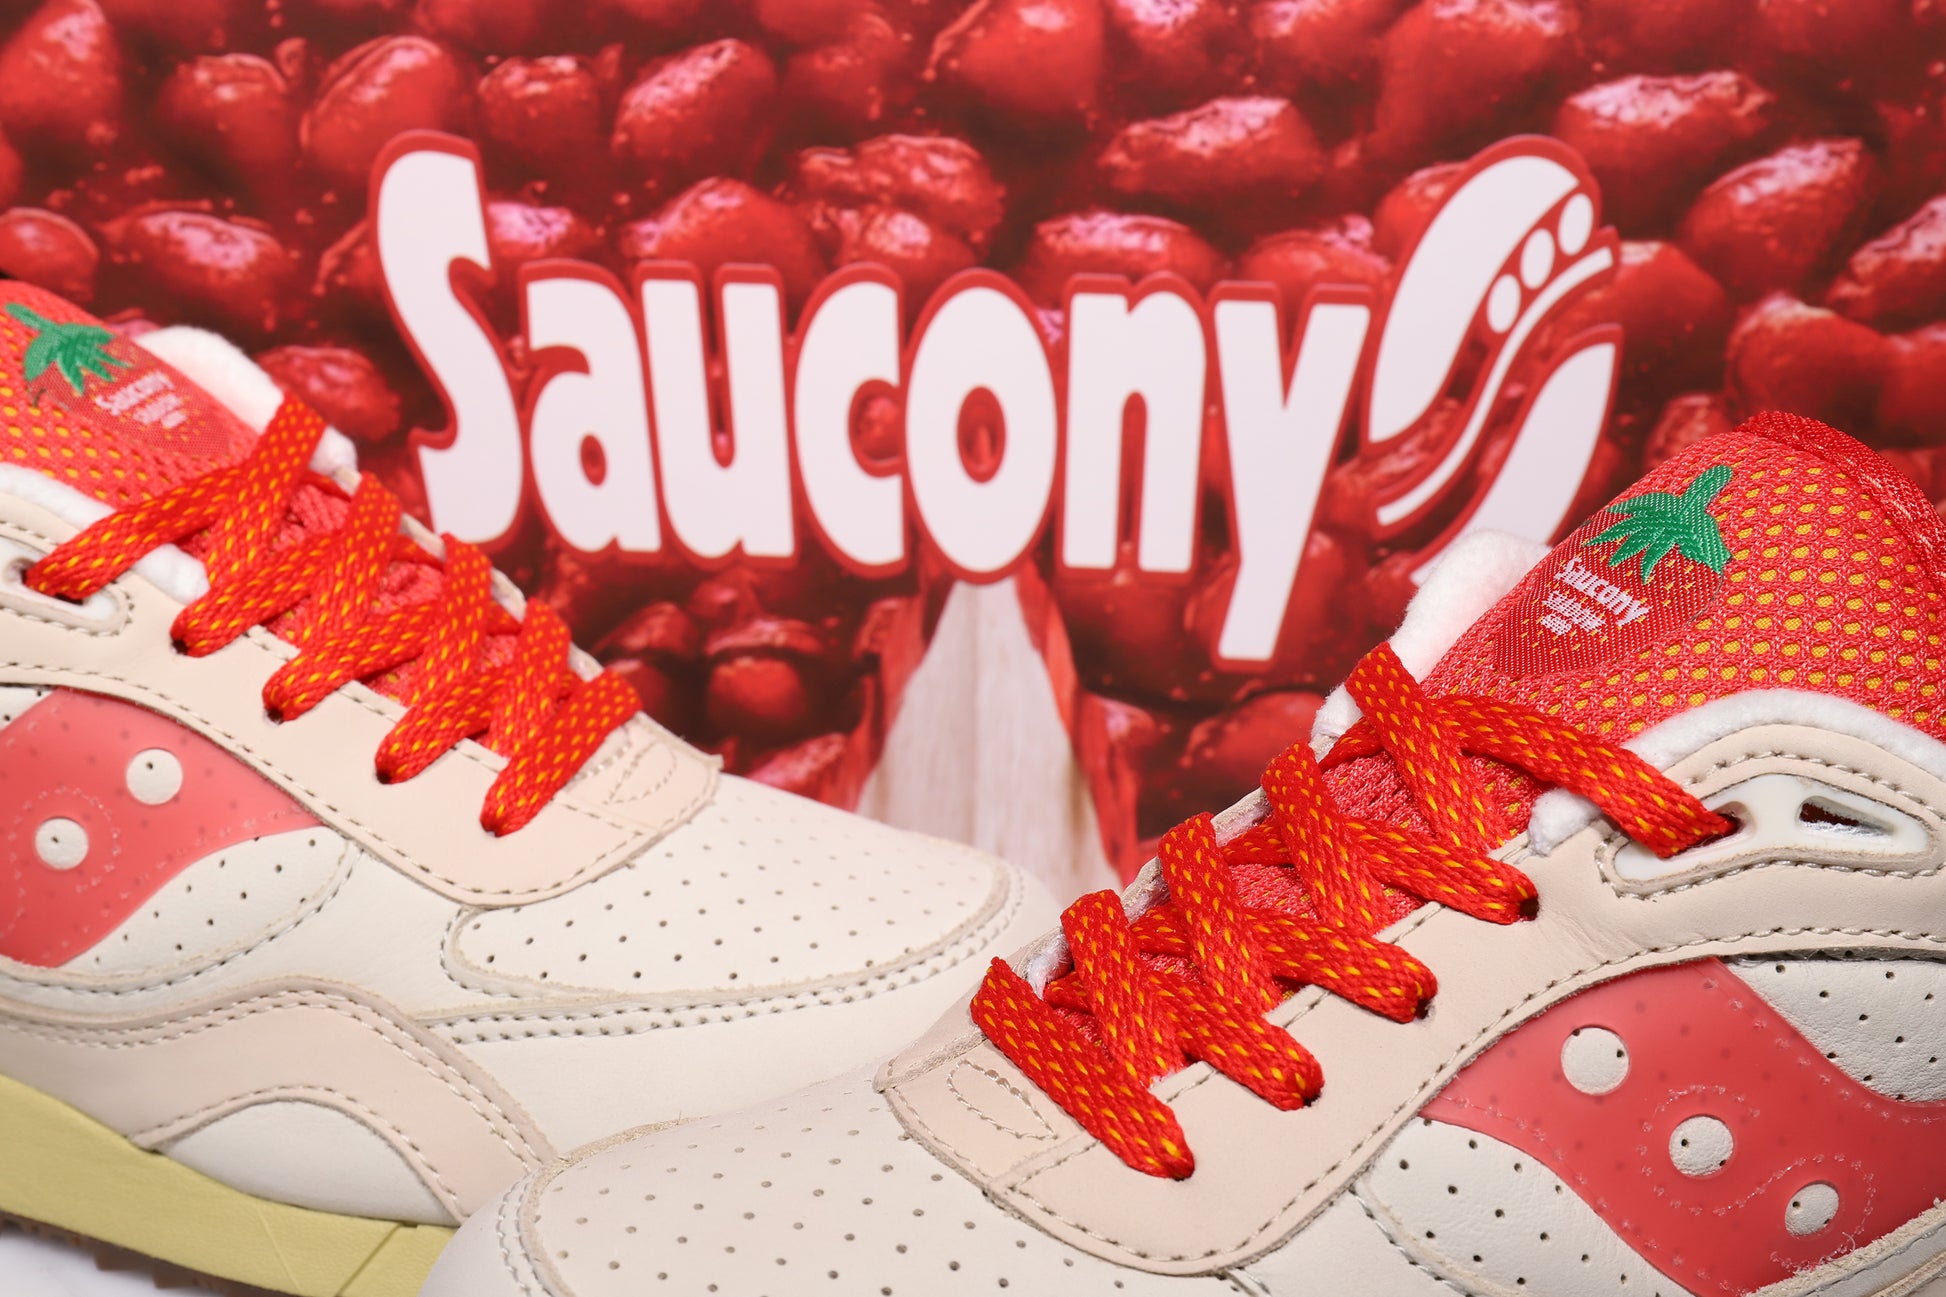 Saucony Mujer